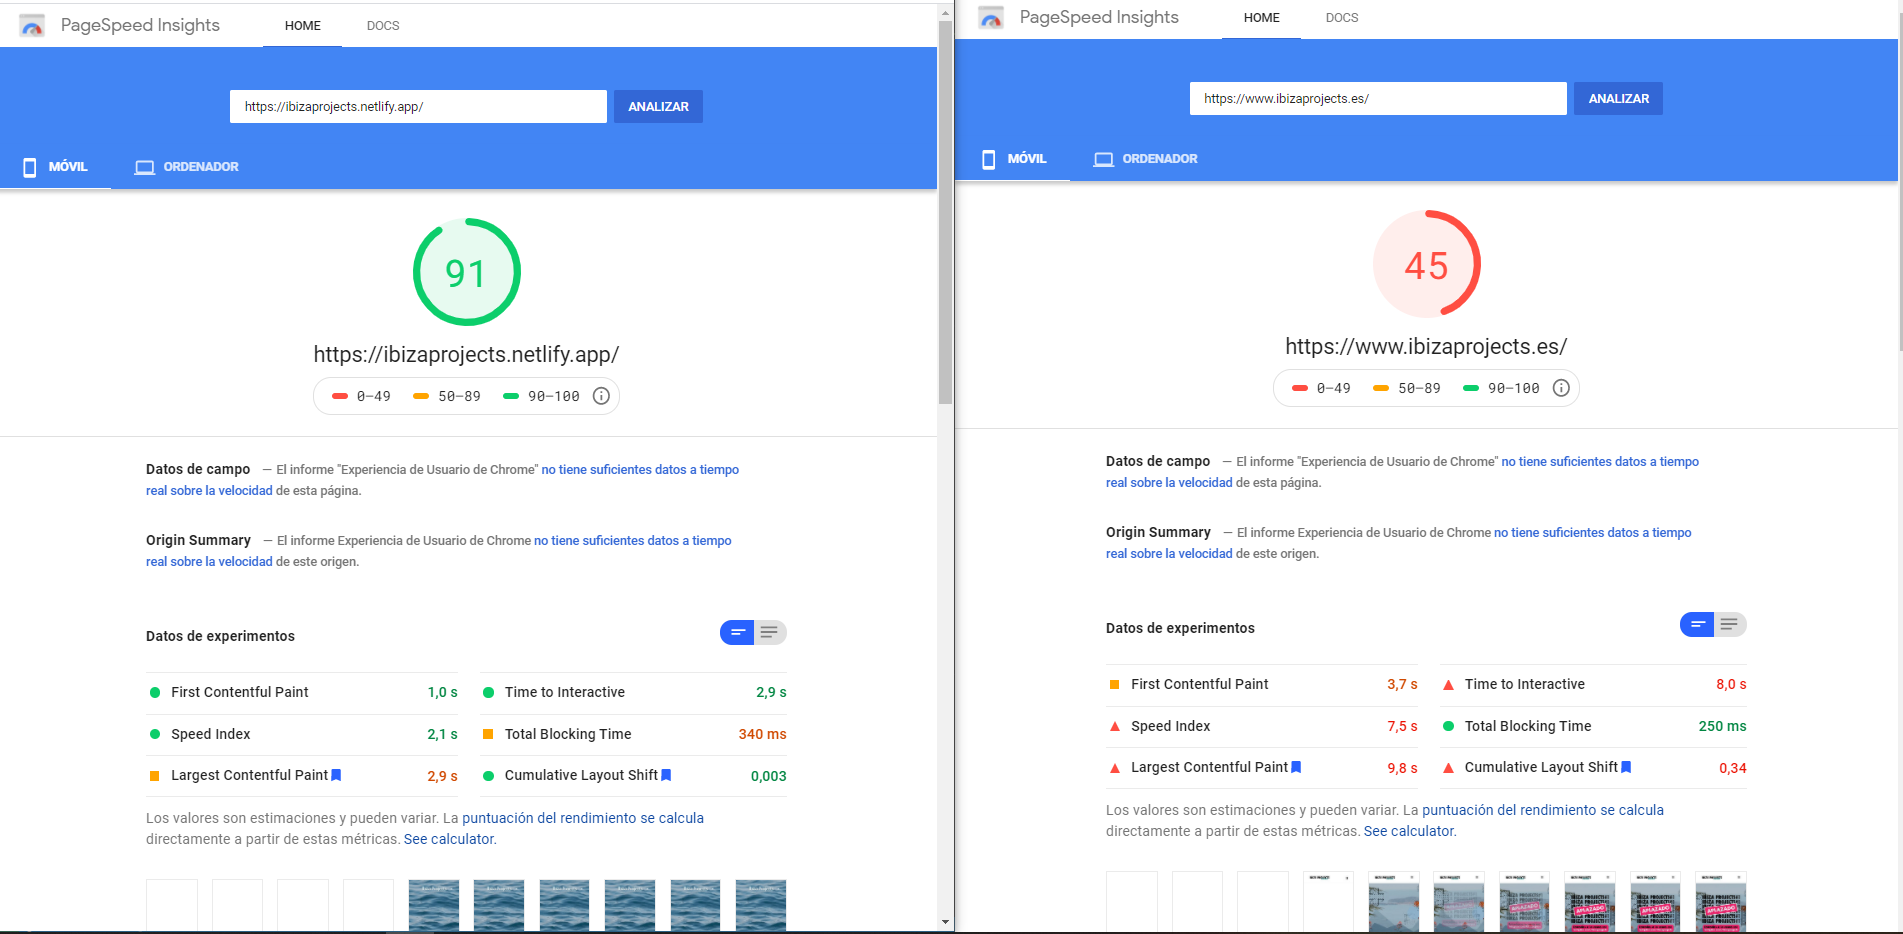 Google Lighthouse scores. The new static website (with 5 times more pages and content, as well as using videos and more images) on the left, and the old Wordpress website on the right.